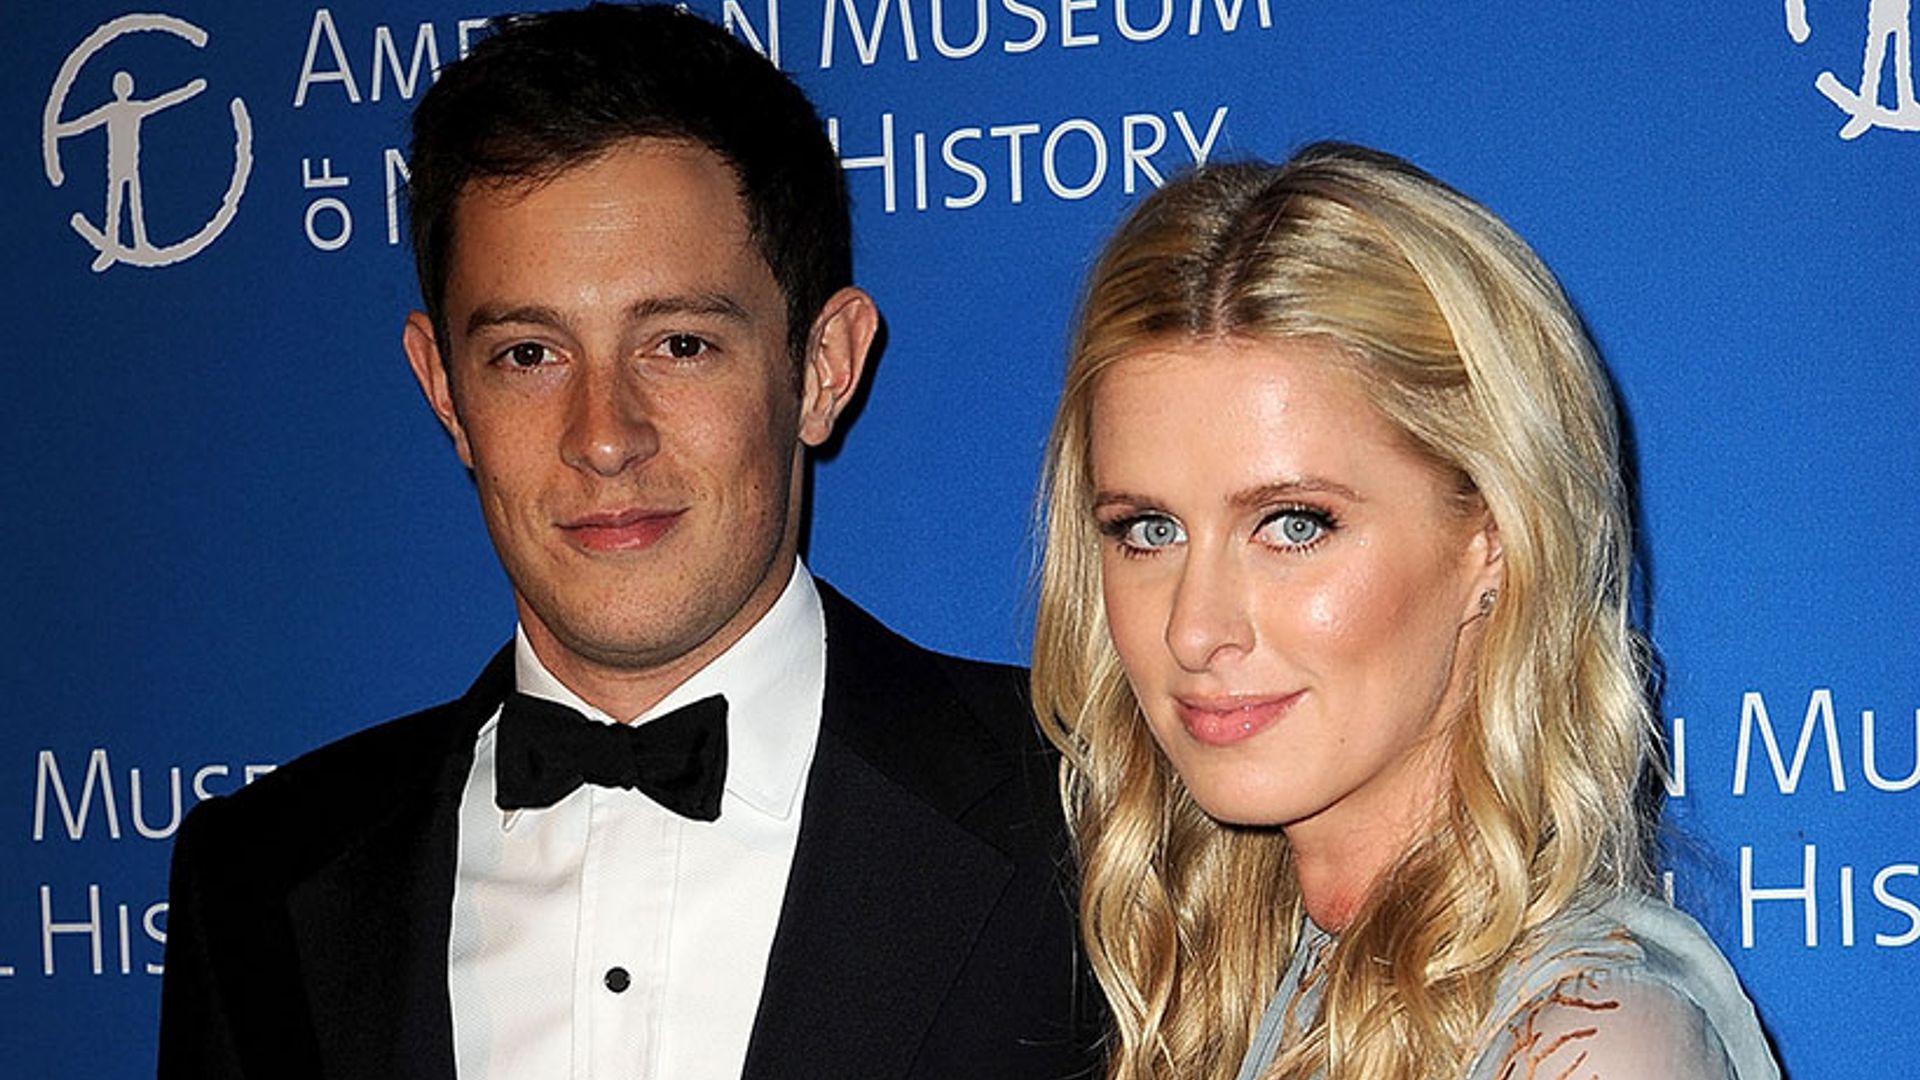 Nicky Hilton 'expecting second baby' with husband James Rothschild